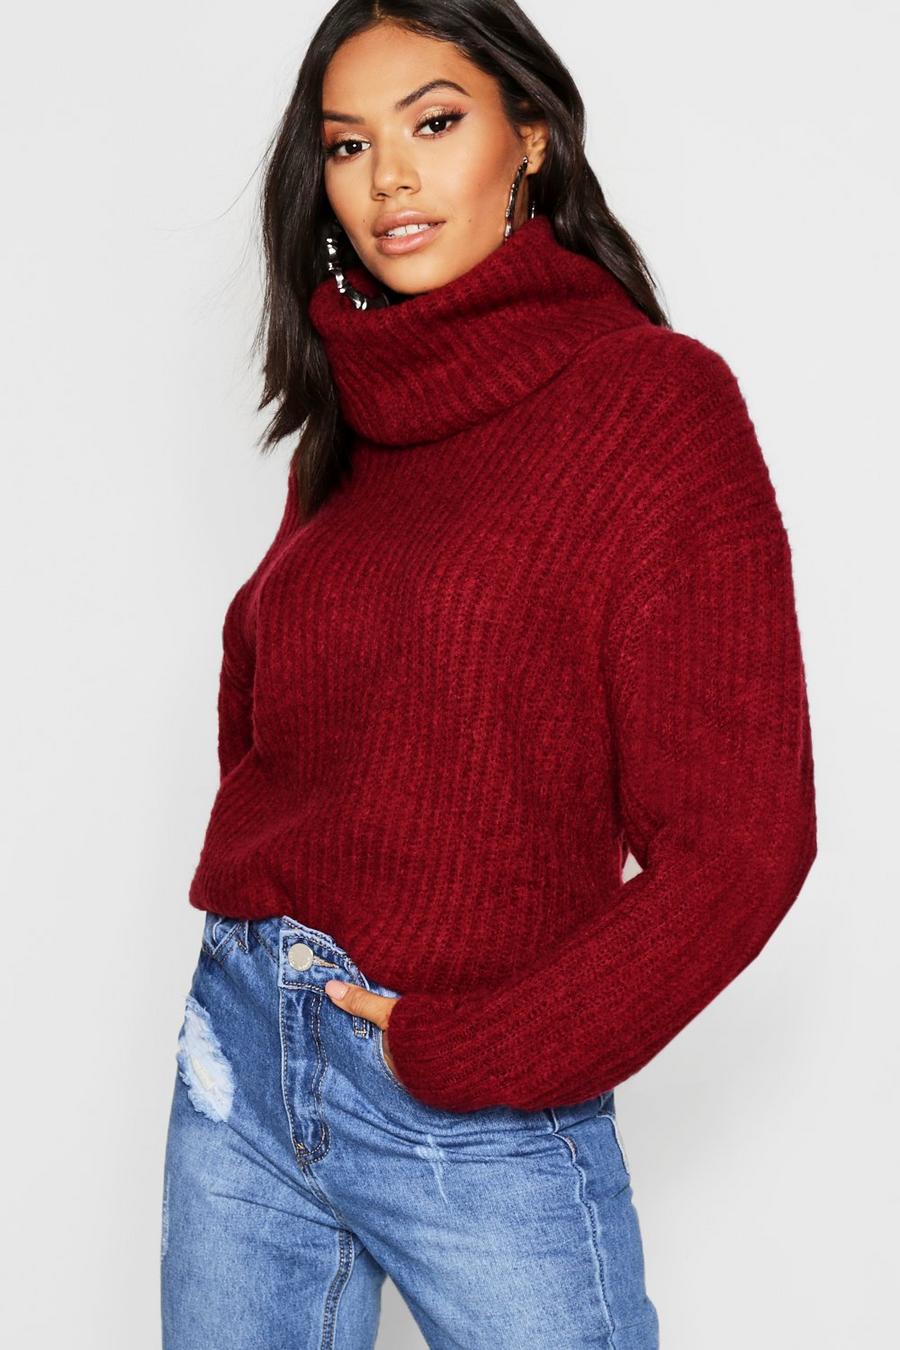 Berry red Oversized Roll Neck Rib Knitted Jumper